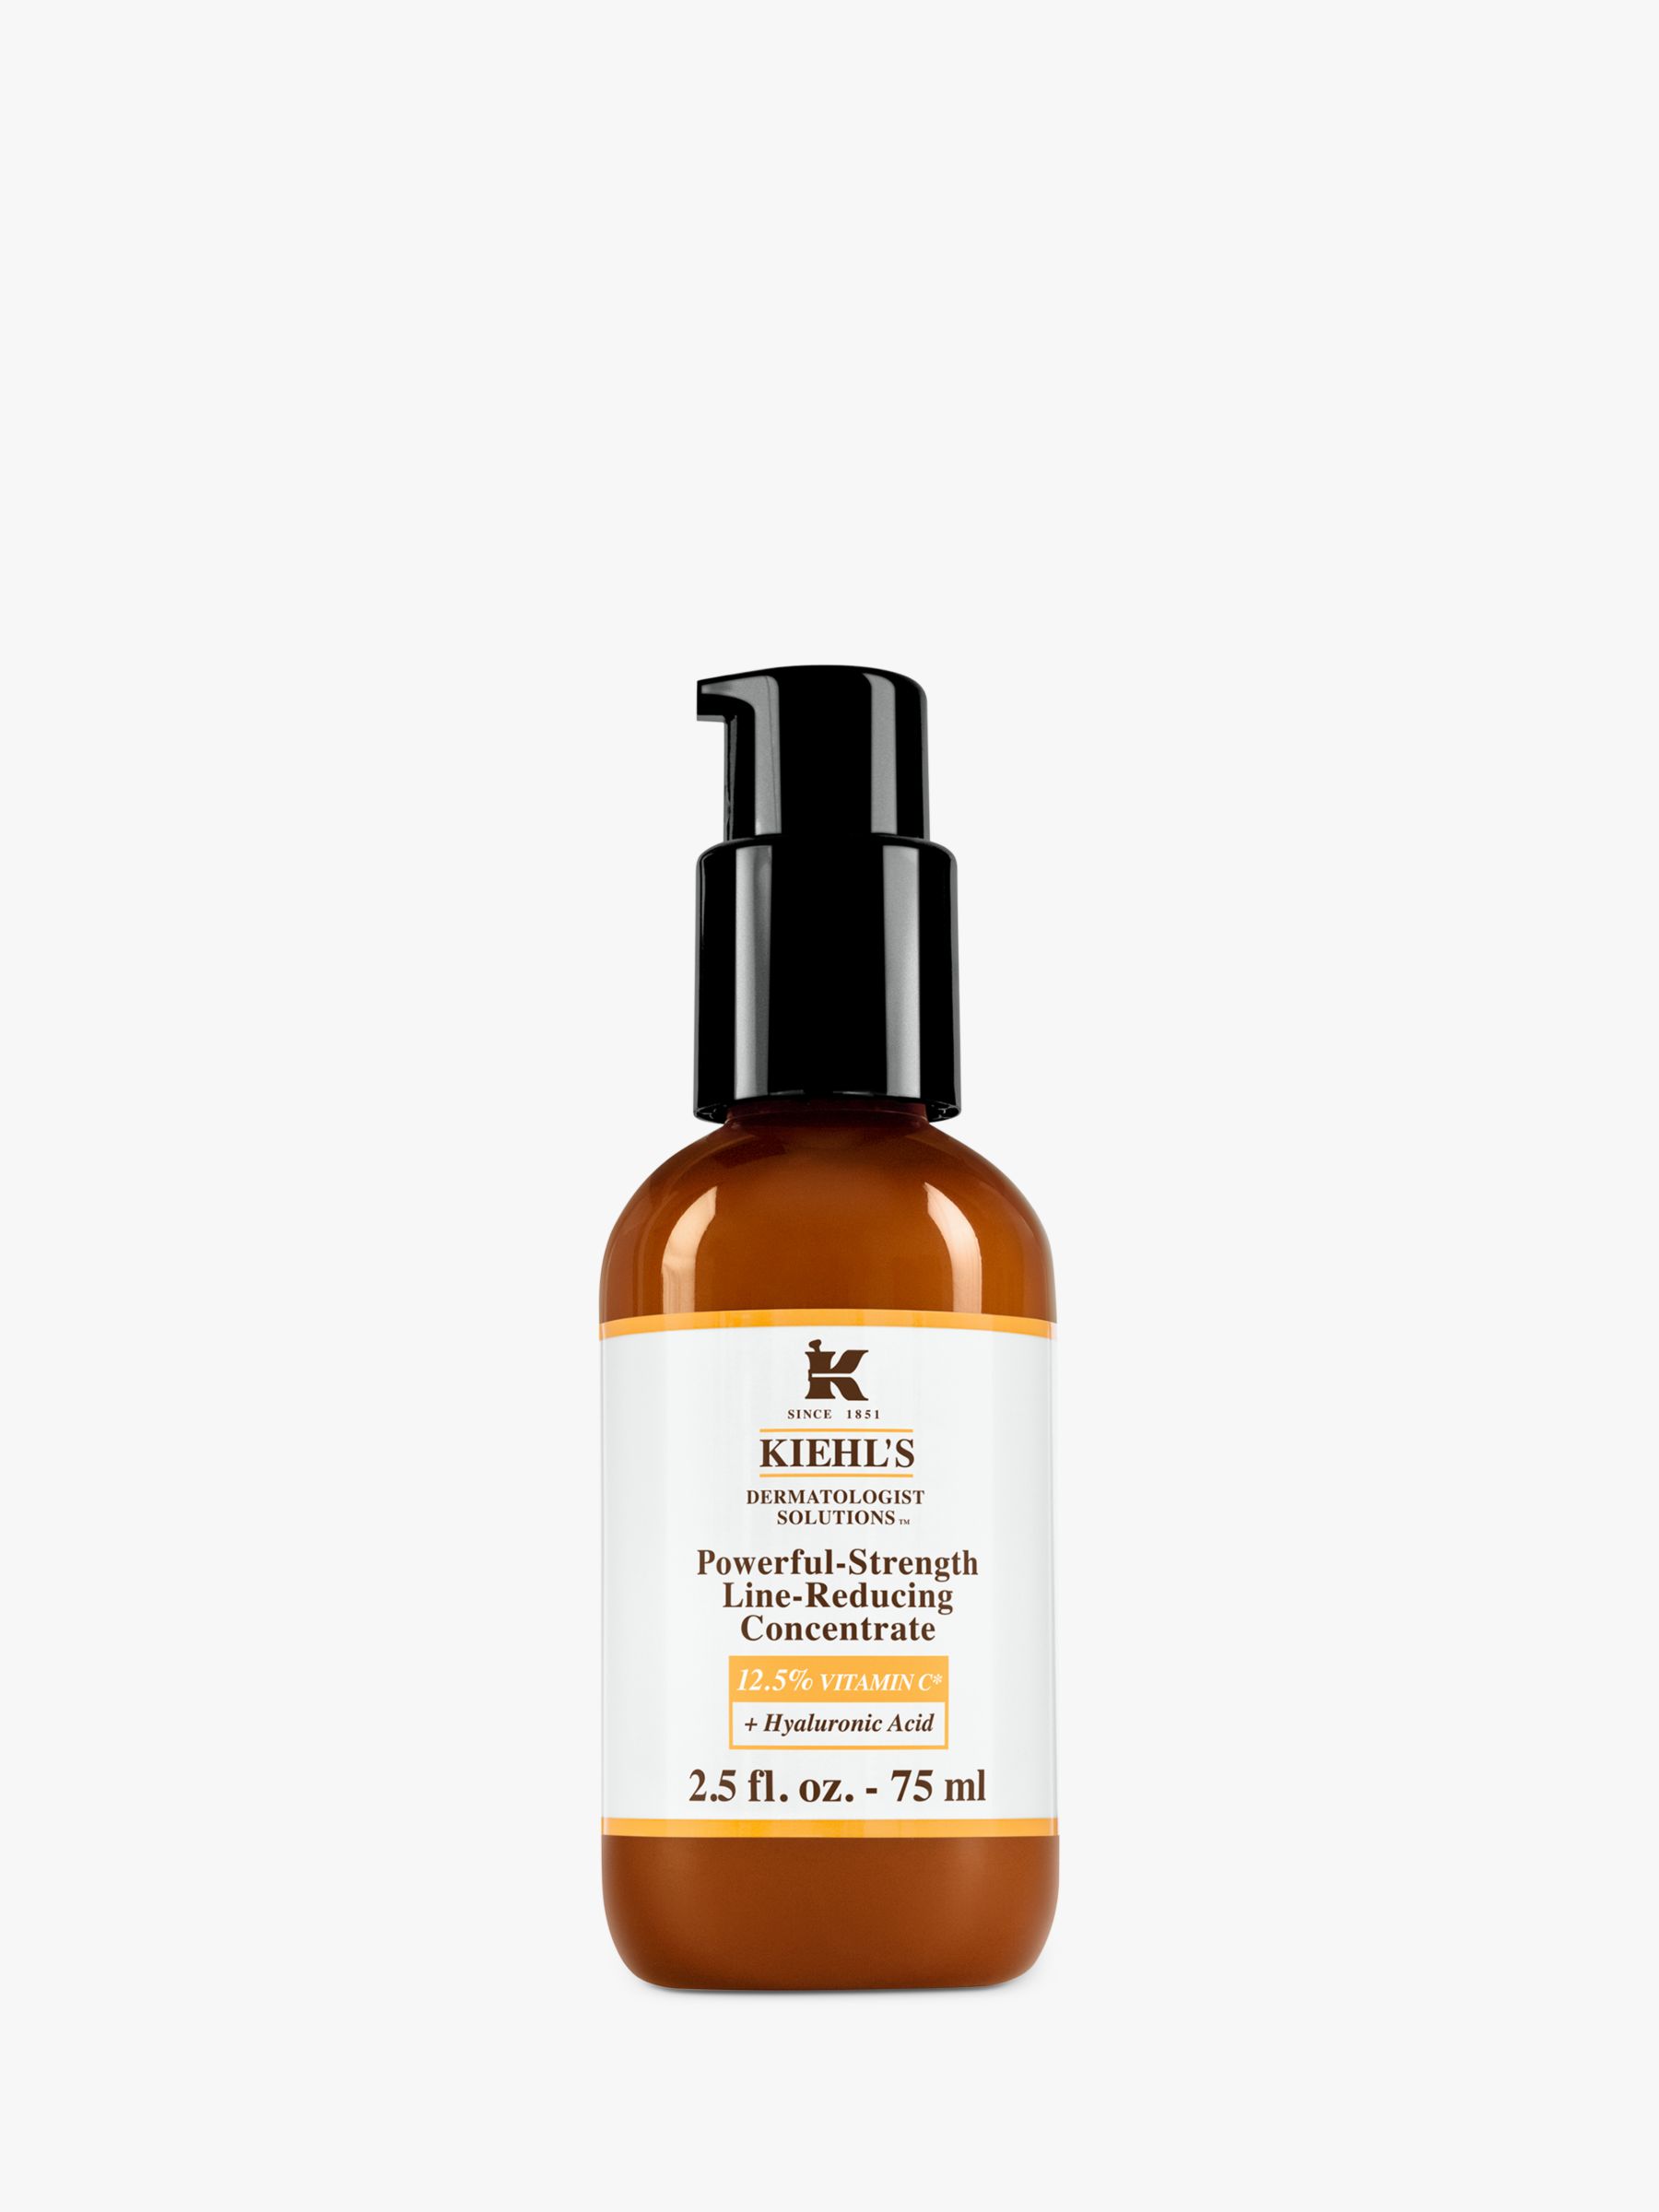 Kiehl's Powerful-Strength Line-Reducing Concentrate Serum, New Formula, 75ml 1